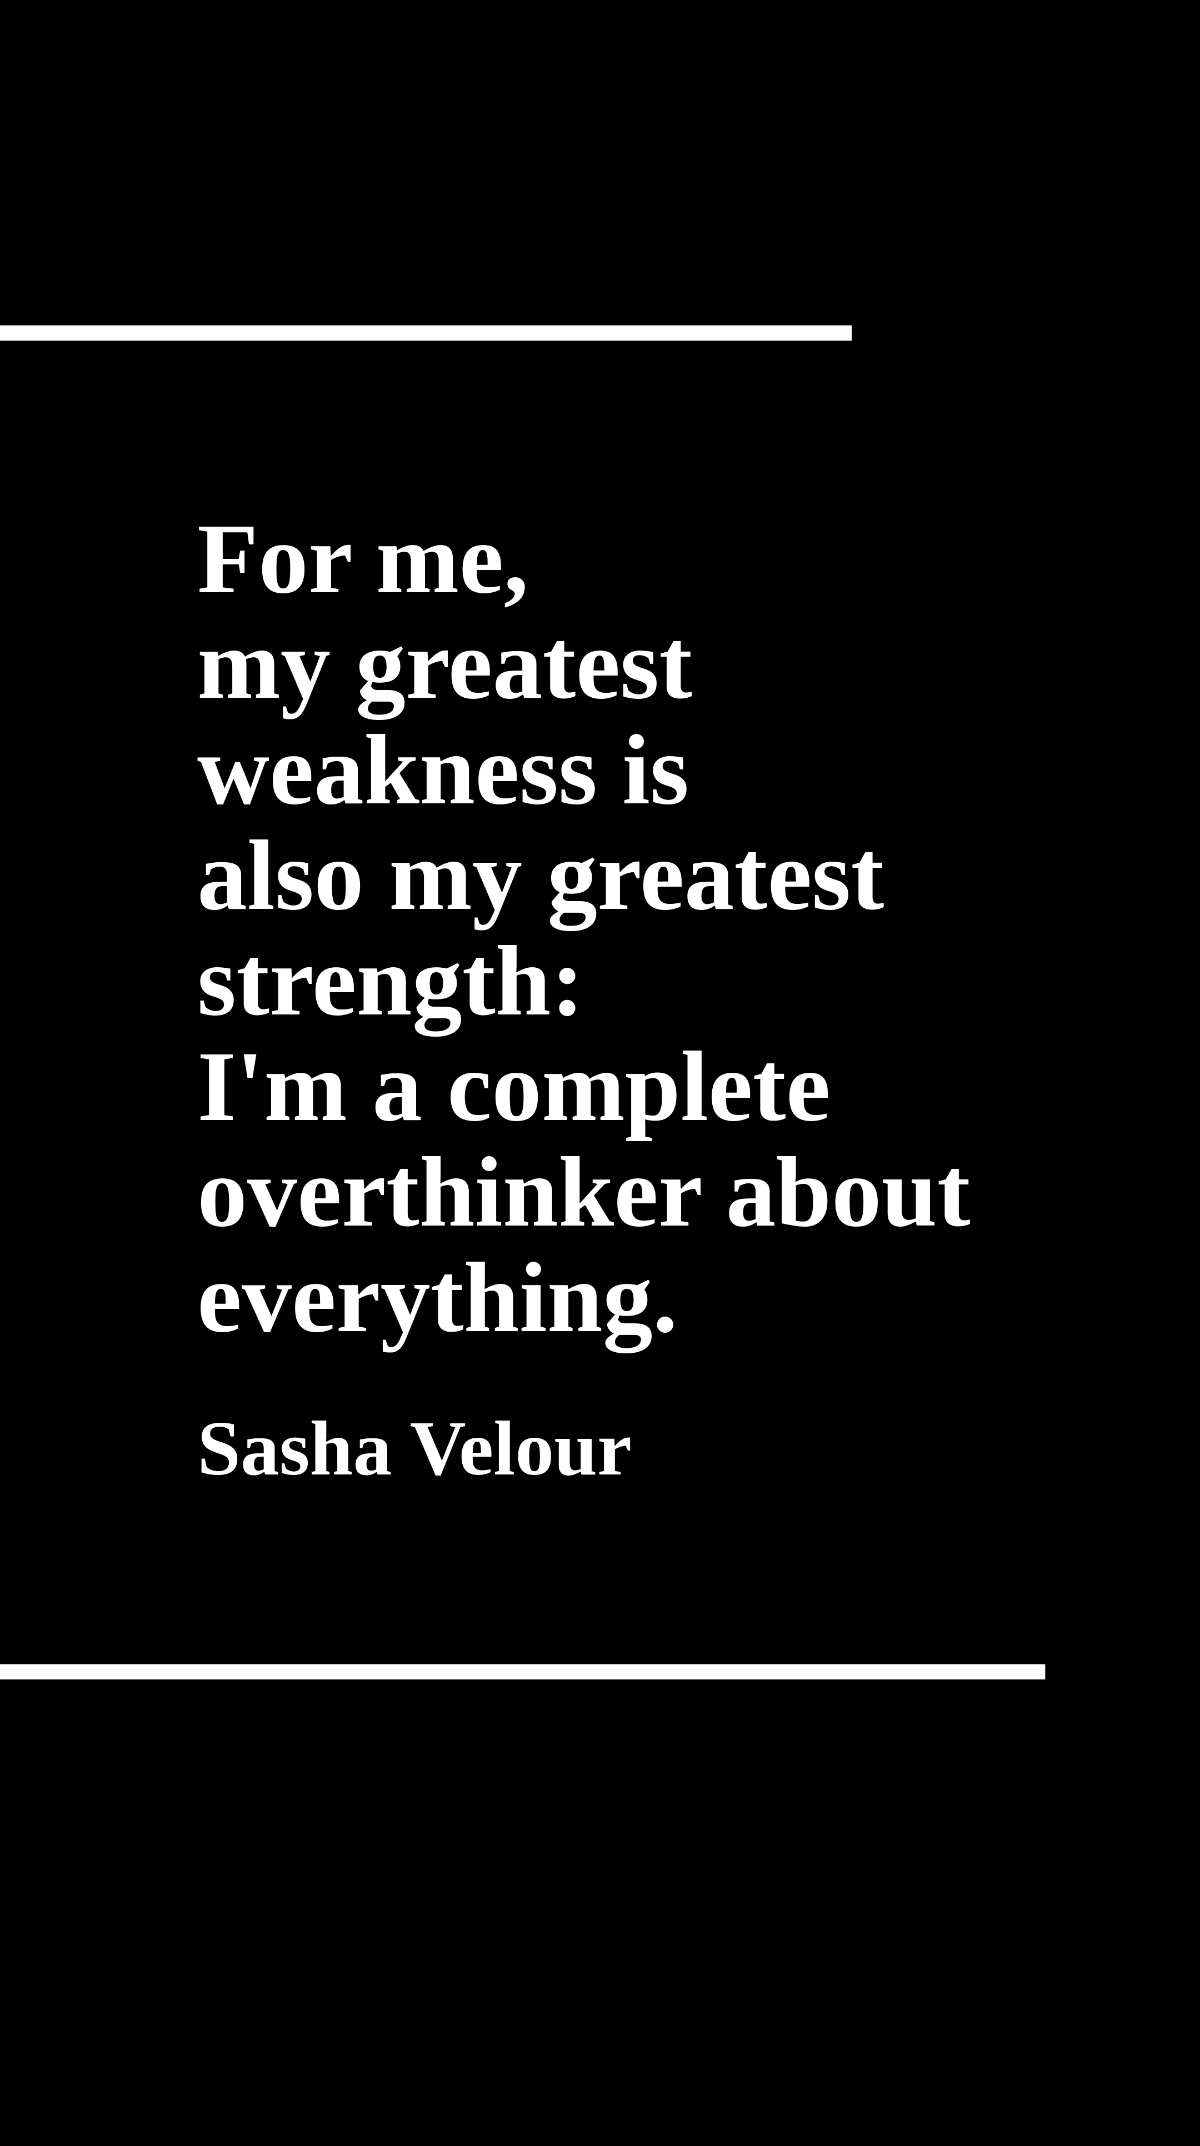 Sasha Velour - For me, my greatest weakness is also my greatest strength: I'm a complete overthinker about everything. Template